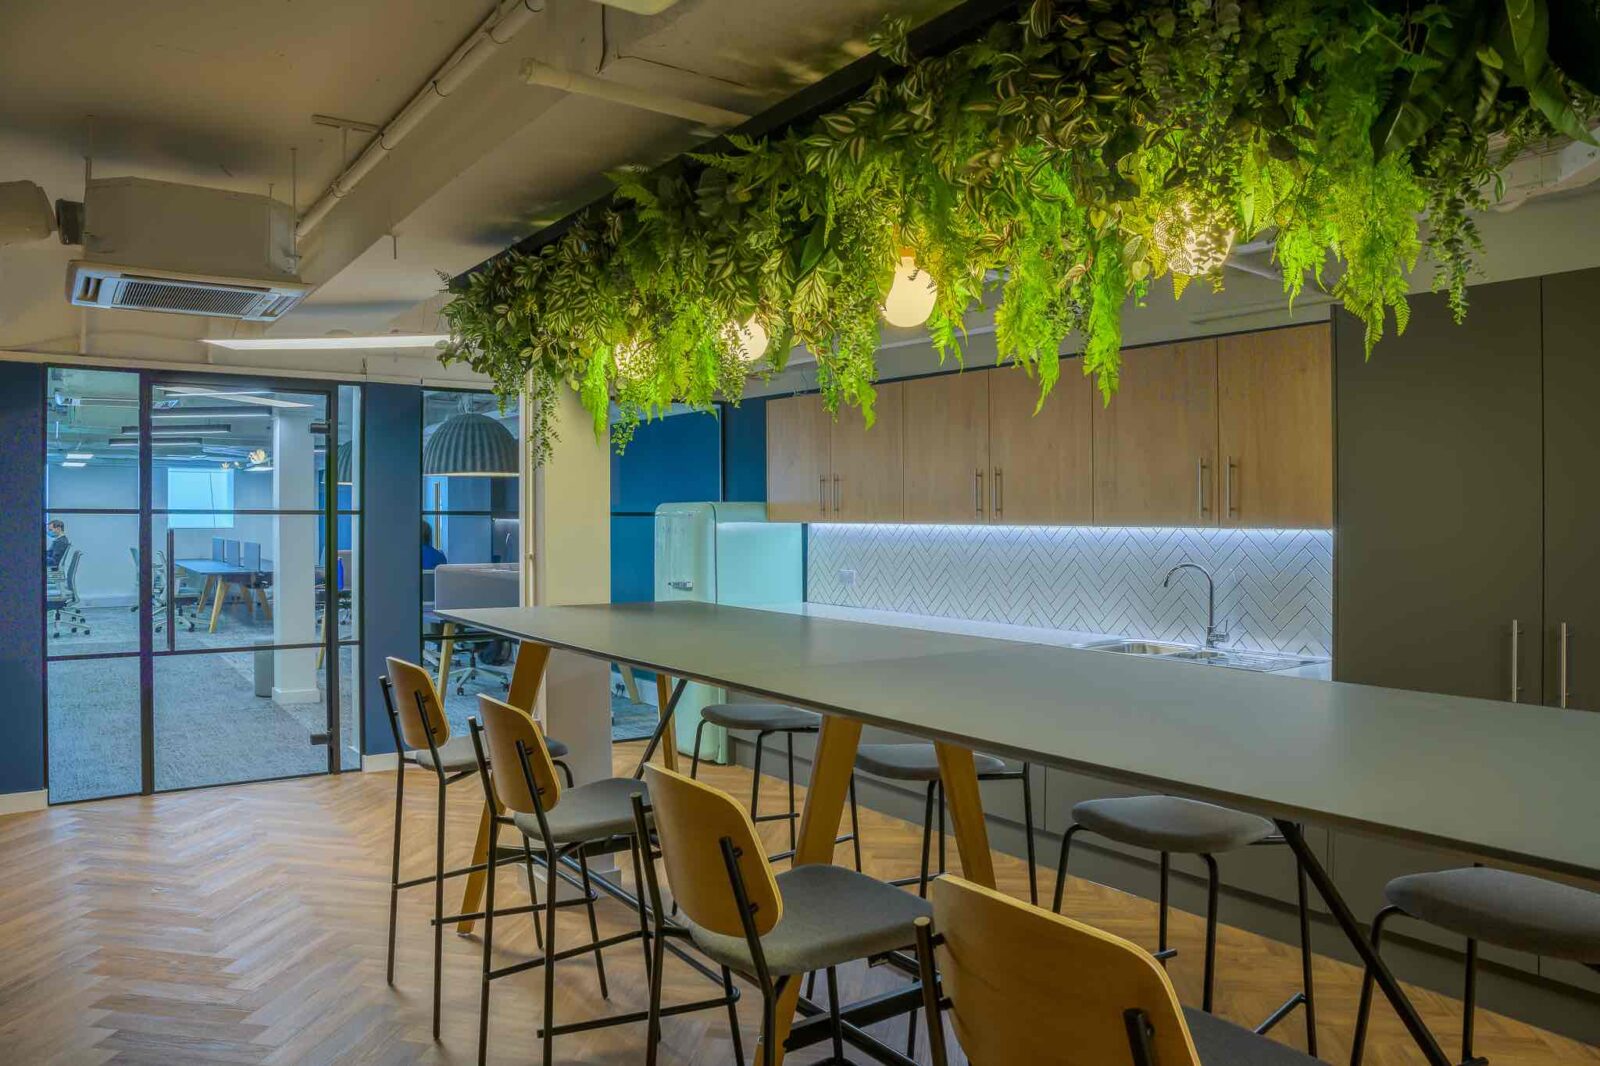 Biophilia: Nature’s influence on Office Design